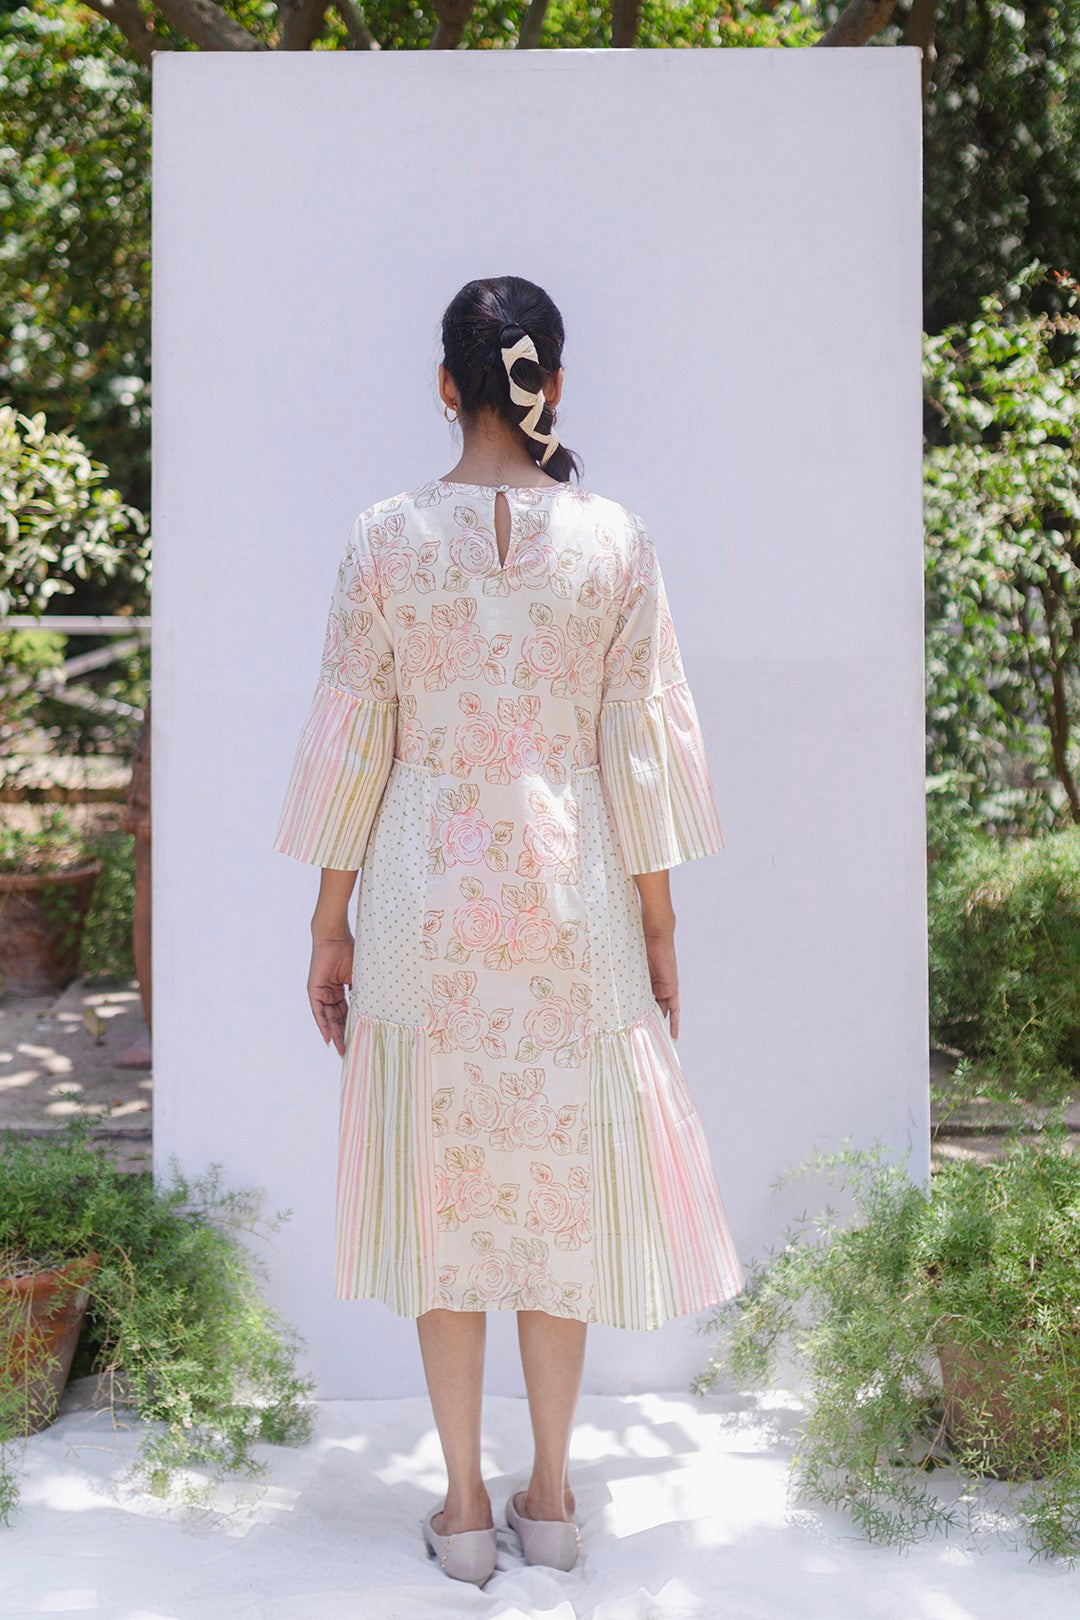 CREAM COTTON BLOCK PRINTED FLORAL FINE PINK ROSE JAAL WITH STRIPES AND POLKA SIDE TIER DRESS